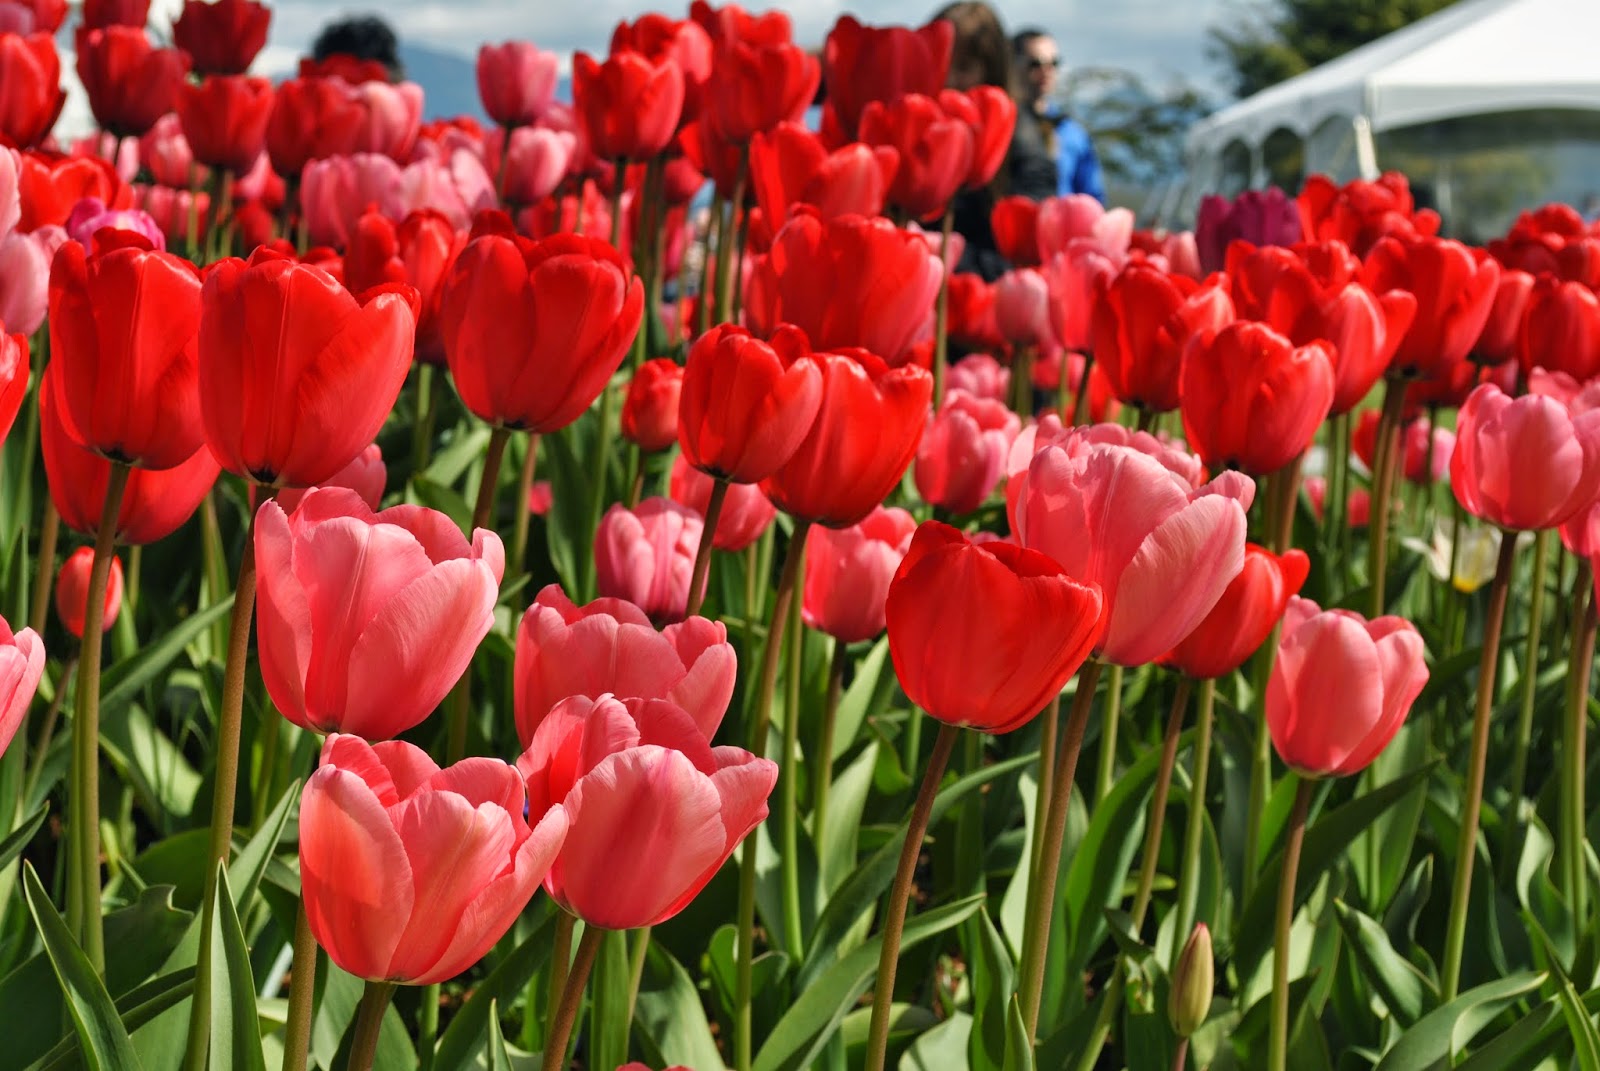 Tulip festival, tulip flowers, girl in a flower garden, Beautiful flowers and beautiful girl,beautiful tulips,  Places to visit near Seattle, 